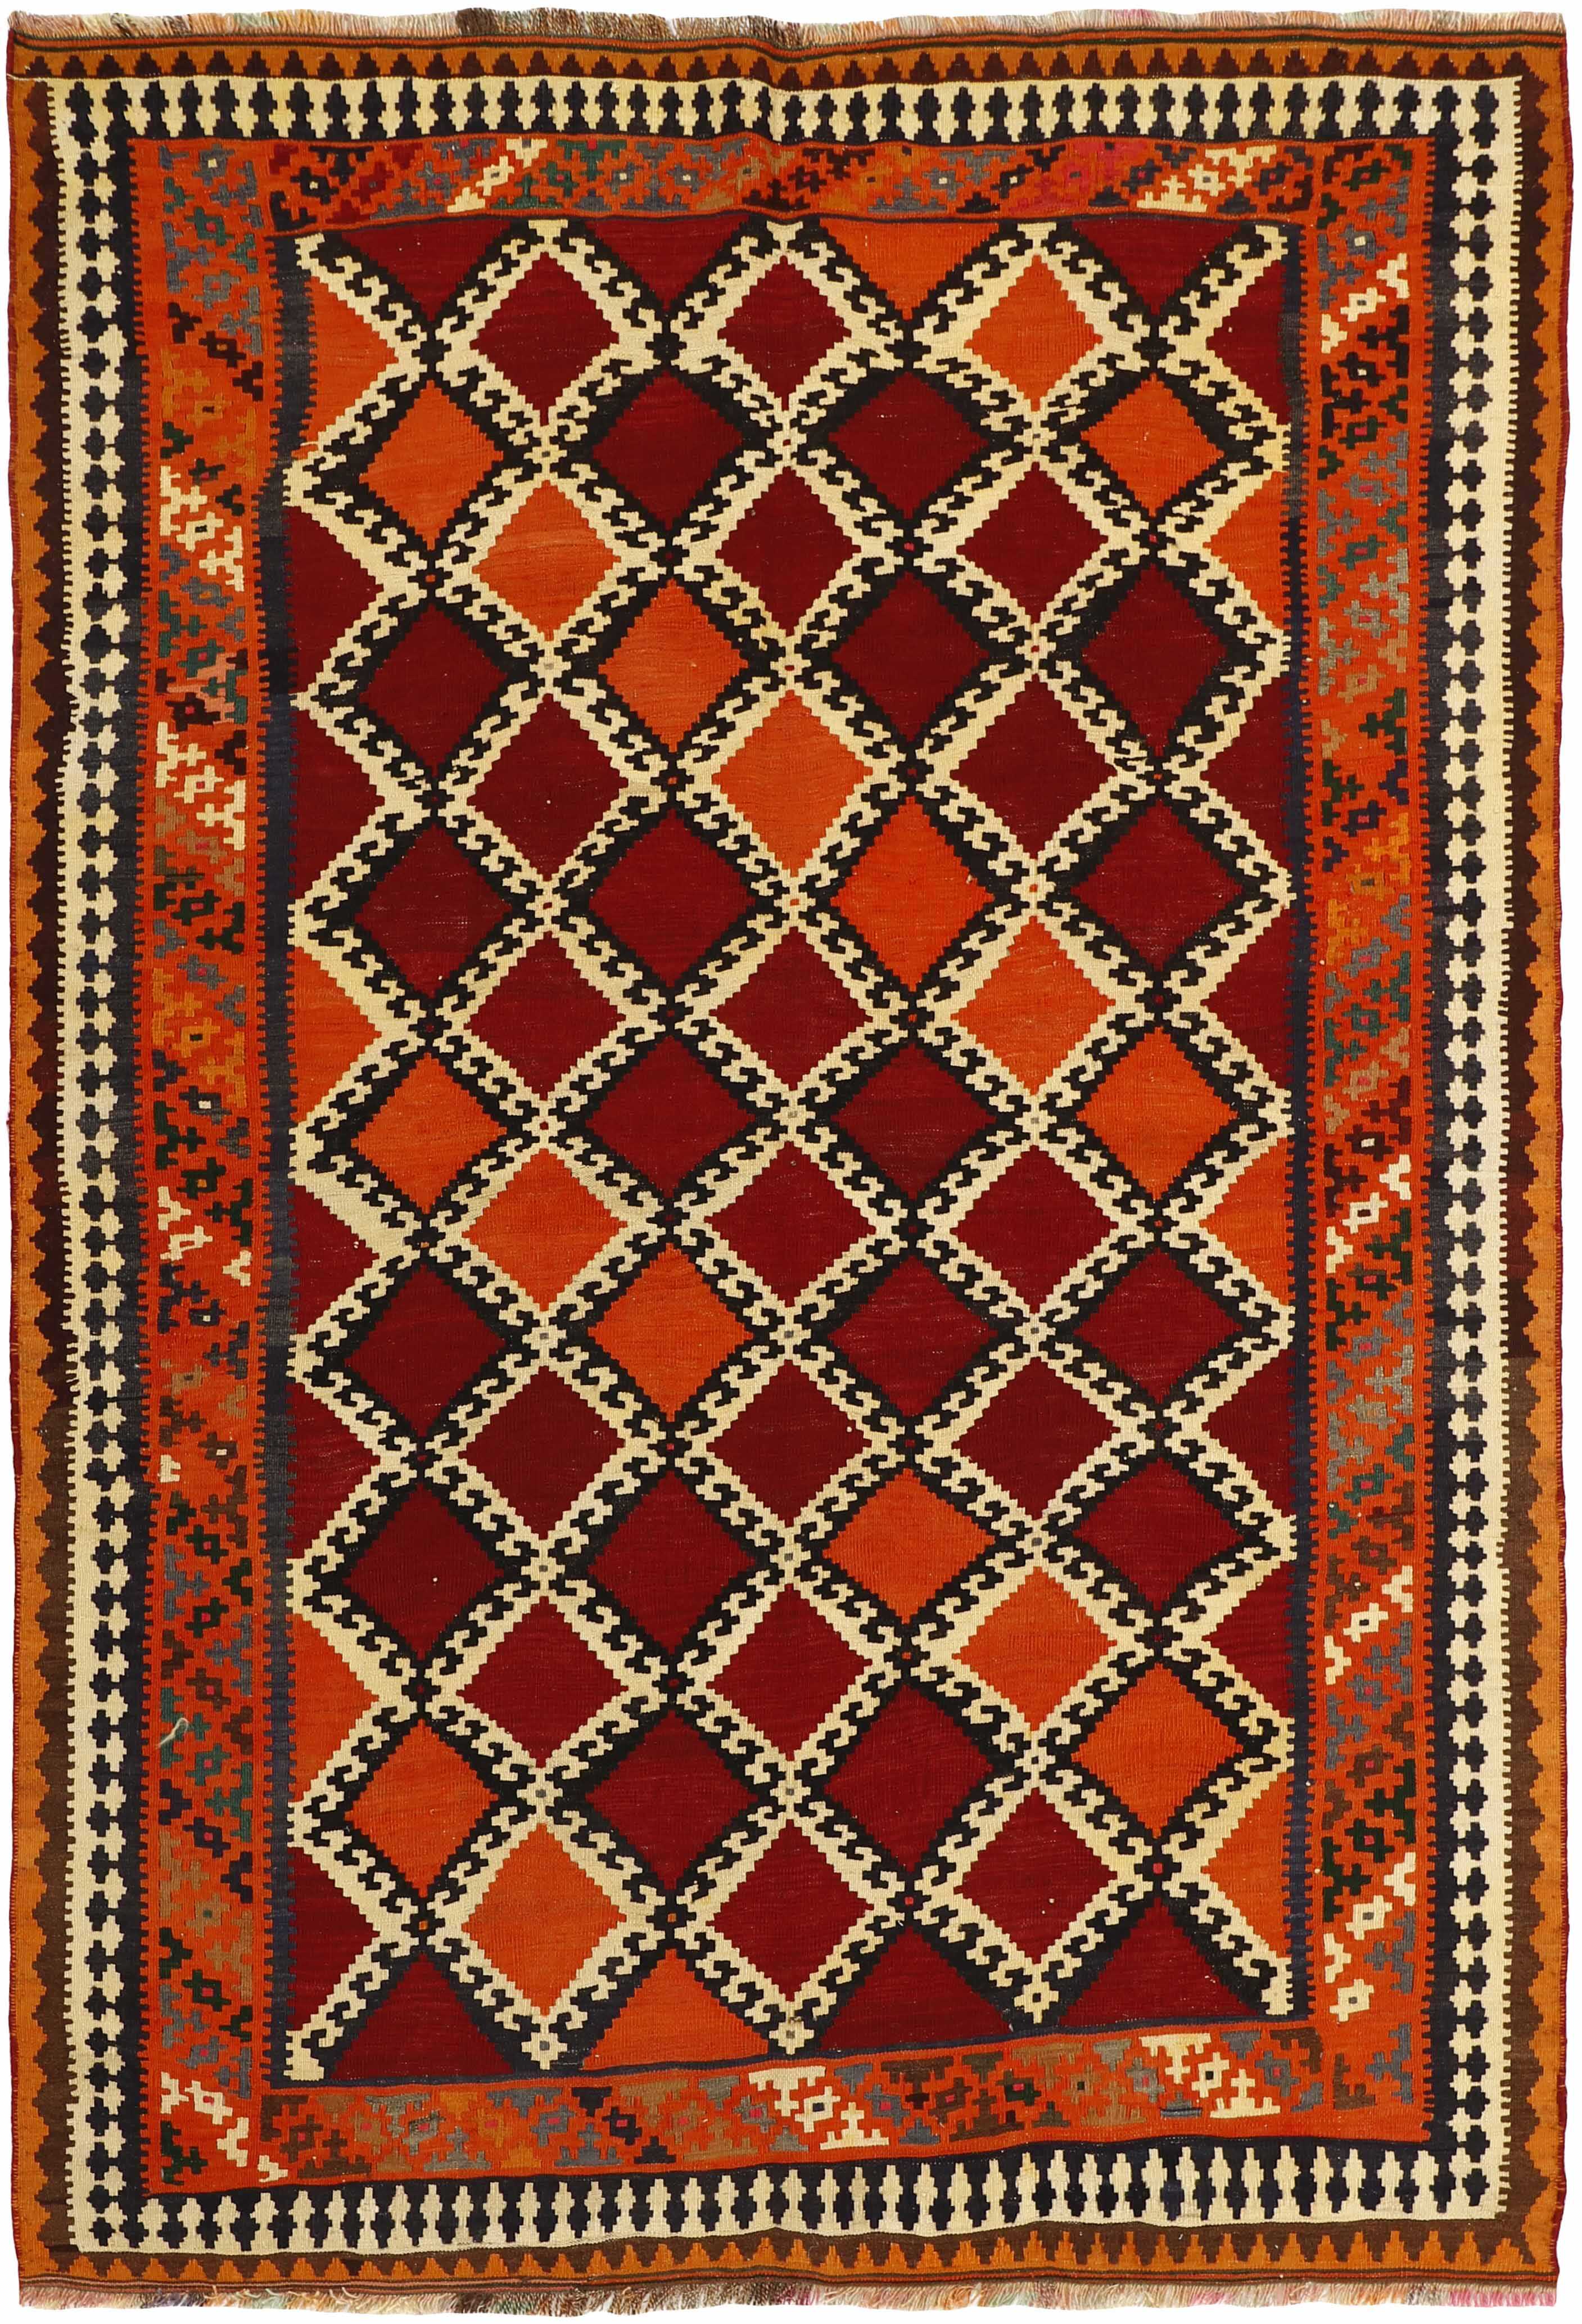 Authentic persian kelim flatweave rug with traditional stripe design in red, blue and black